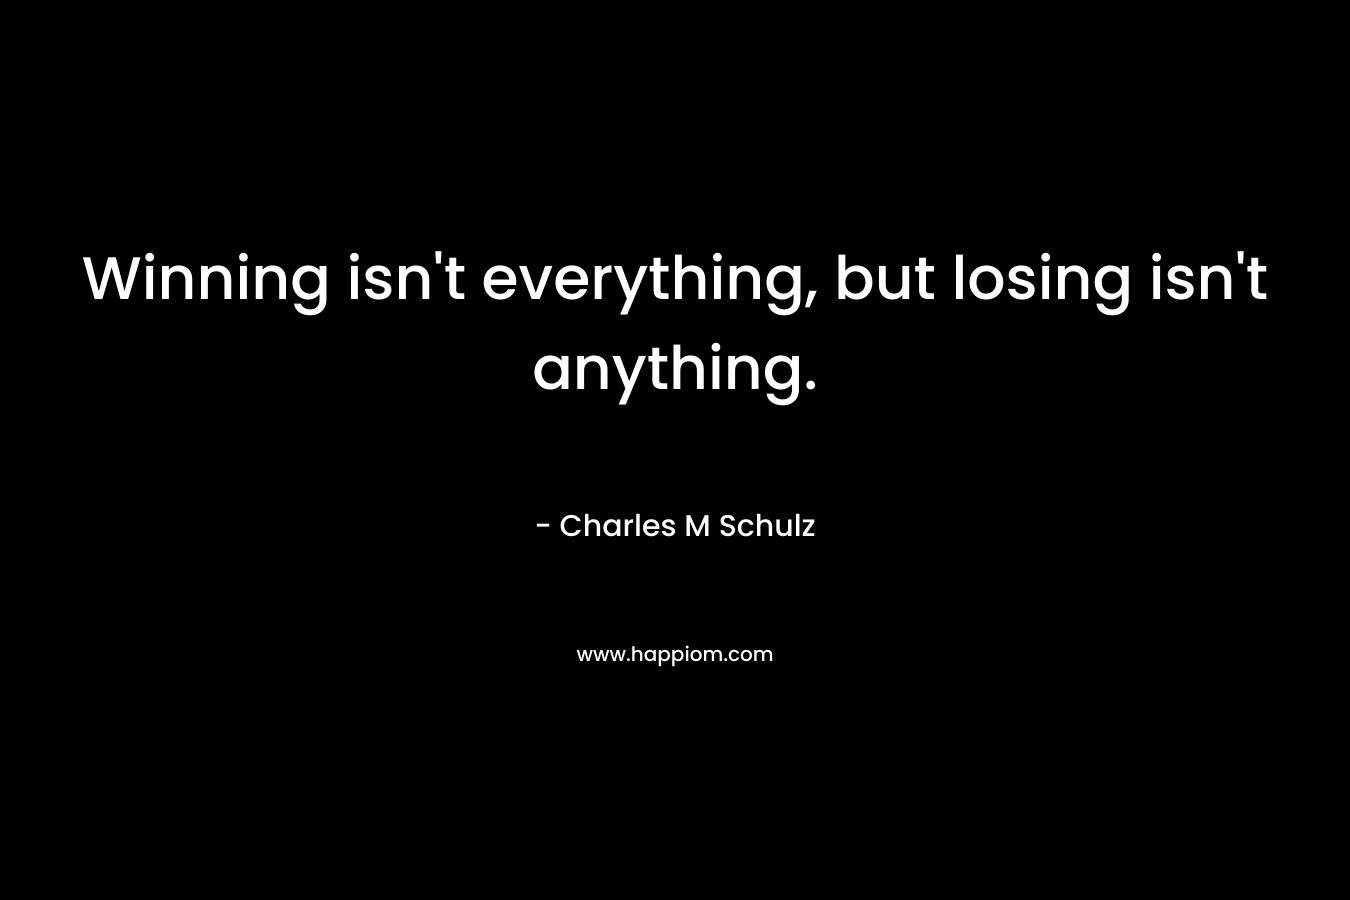 Winning isn’t everything, but losing isn’t anything. – Charles M Schulz